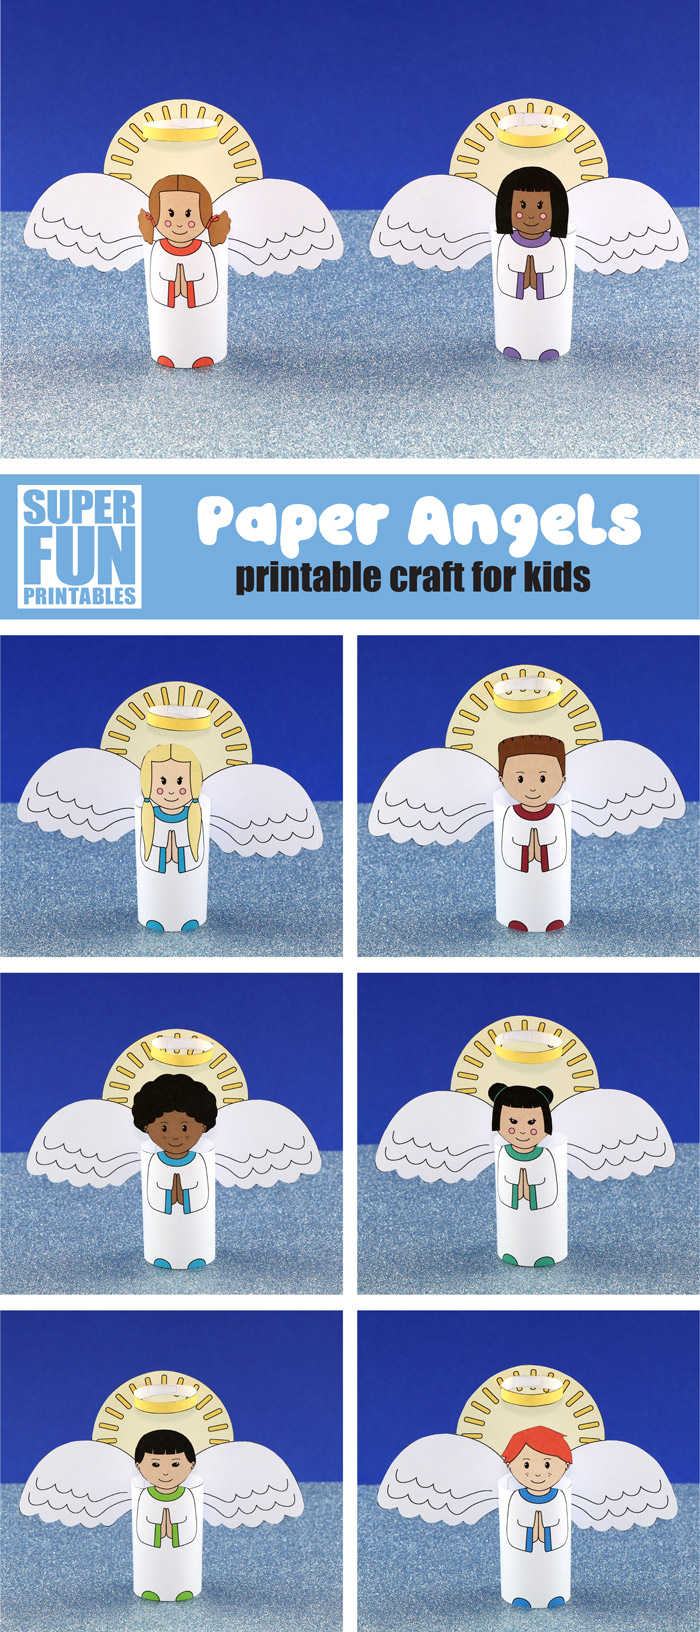 Printable angel craft for kids - a fun and easy Christmas craft for kids of all ages